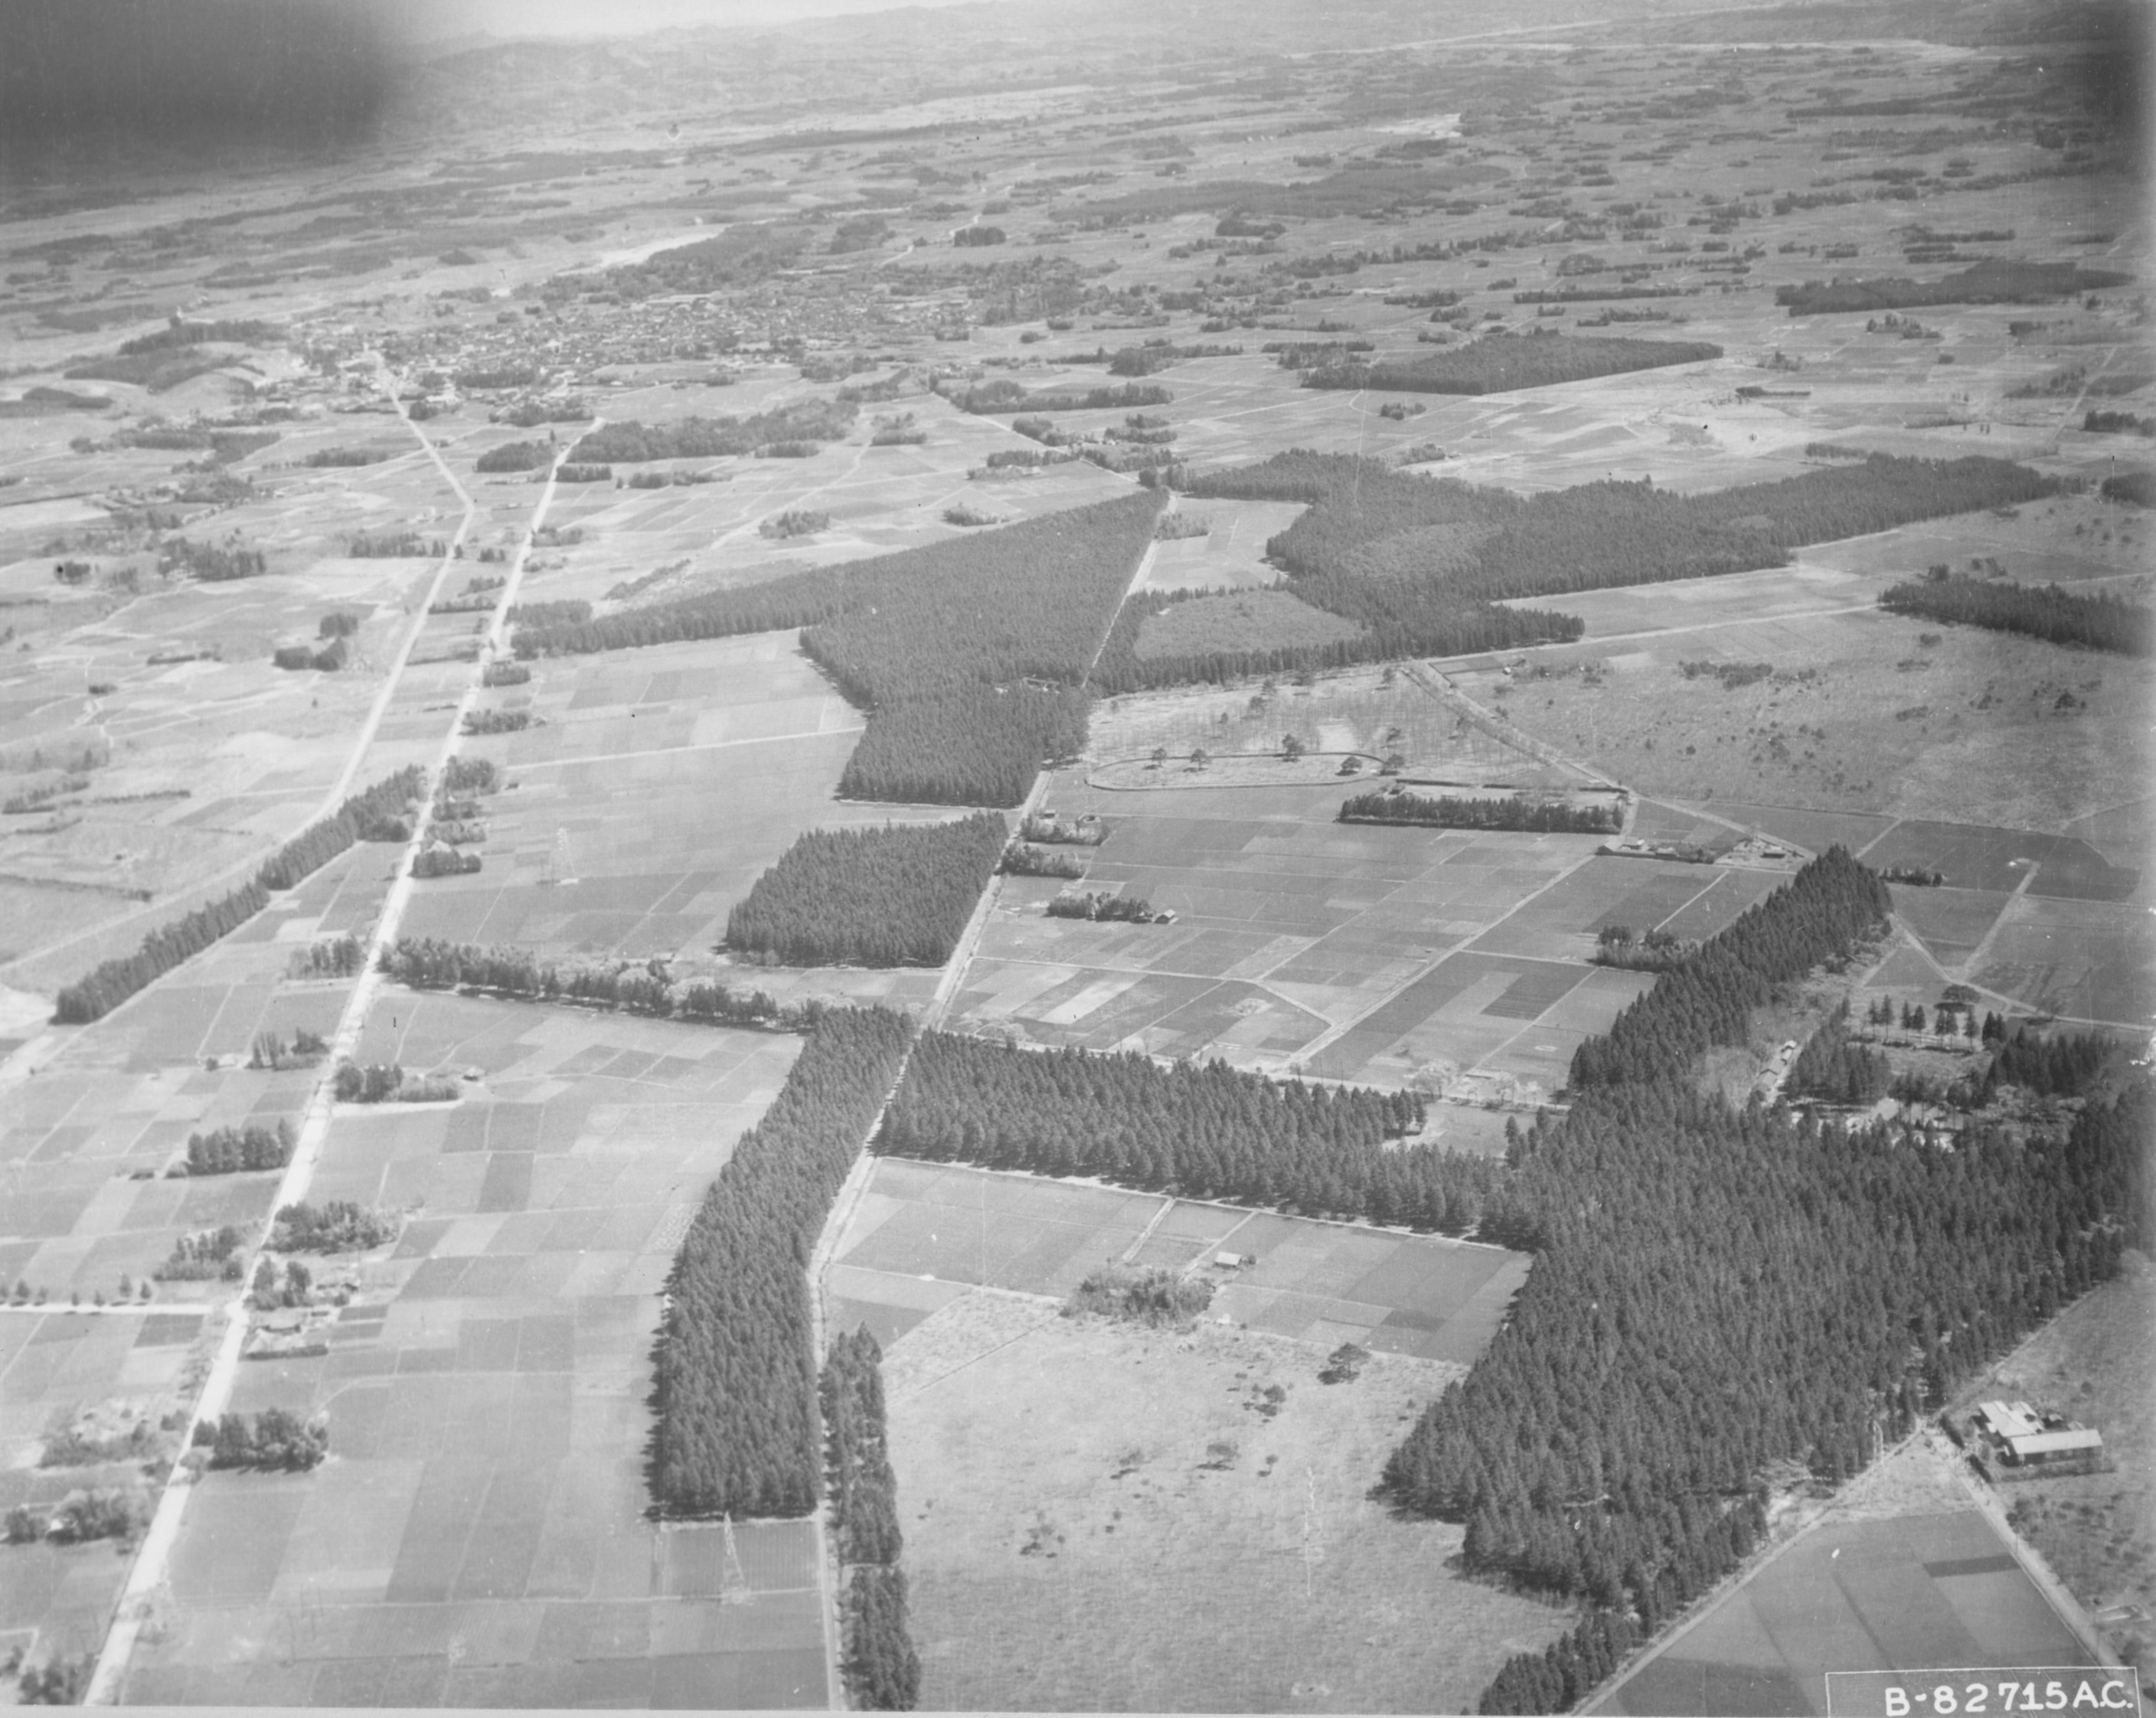 Aerial photograph taken by one of the Doolittle Raiders during the attack, 18 Apr 1942, photo 3 of 3